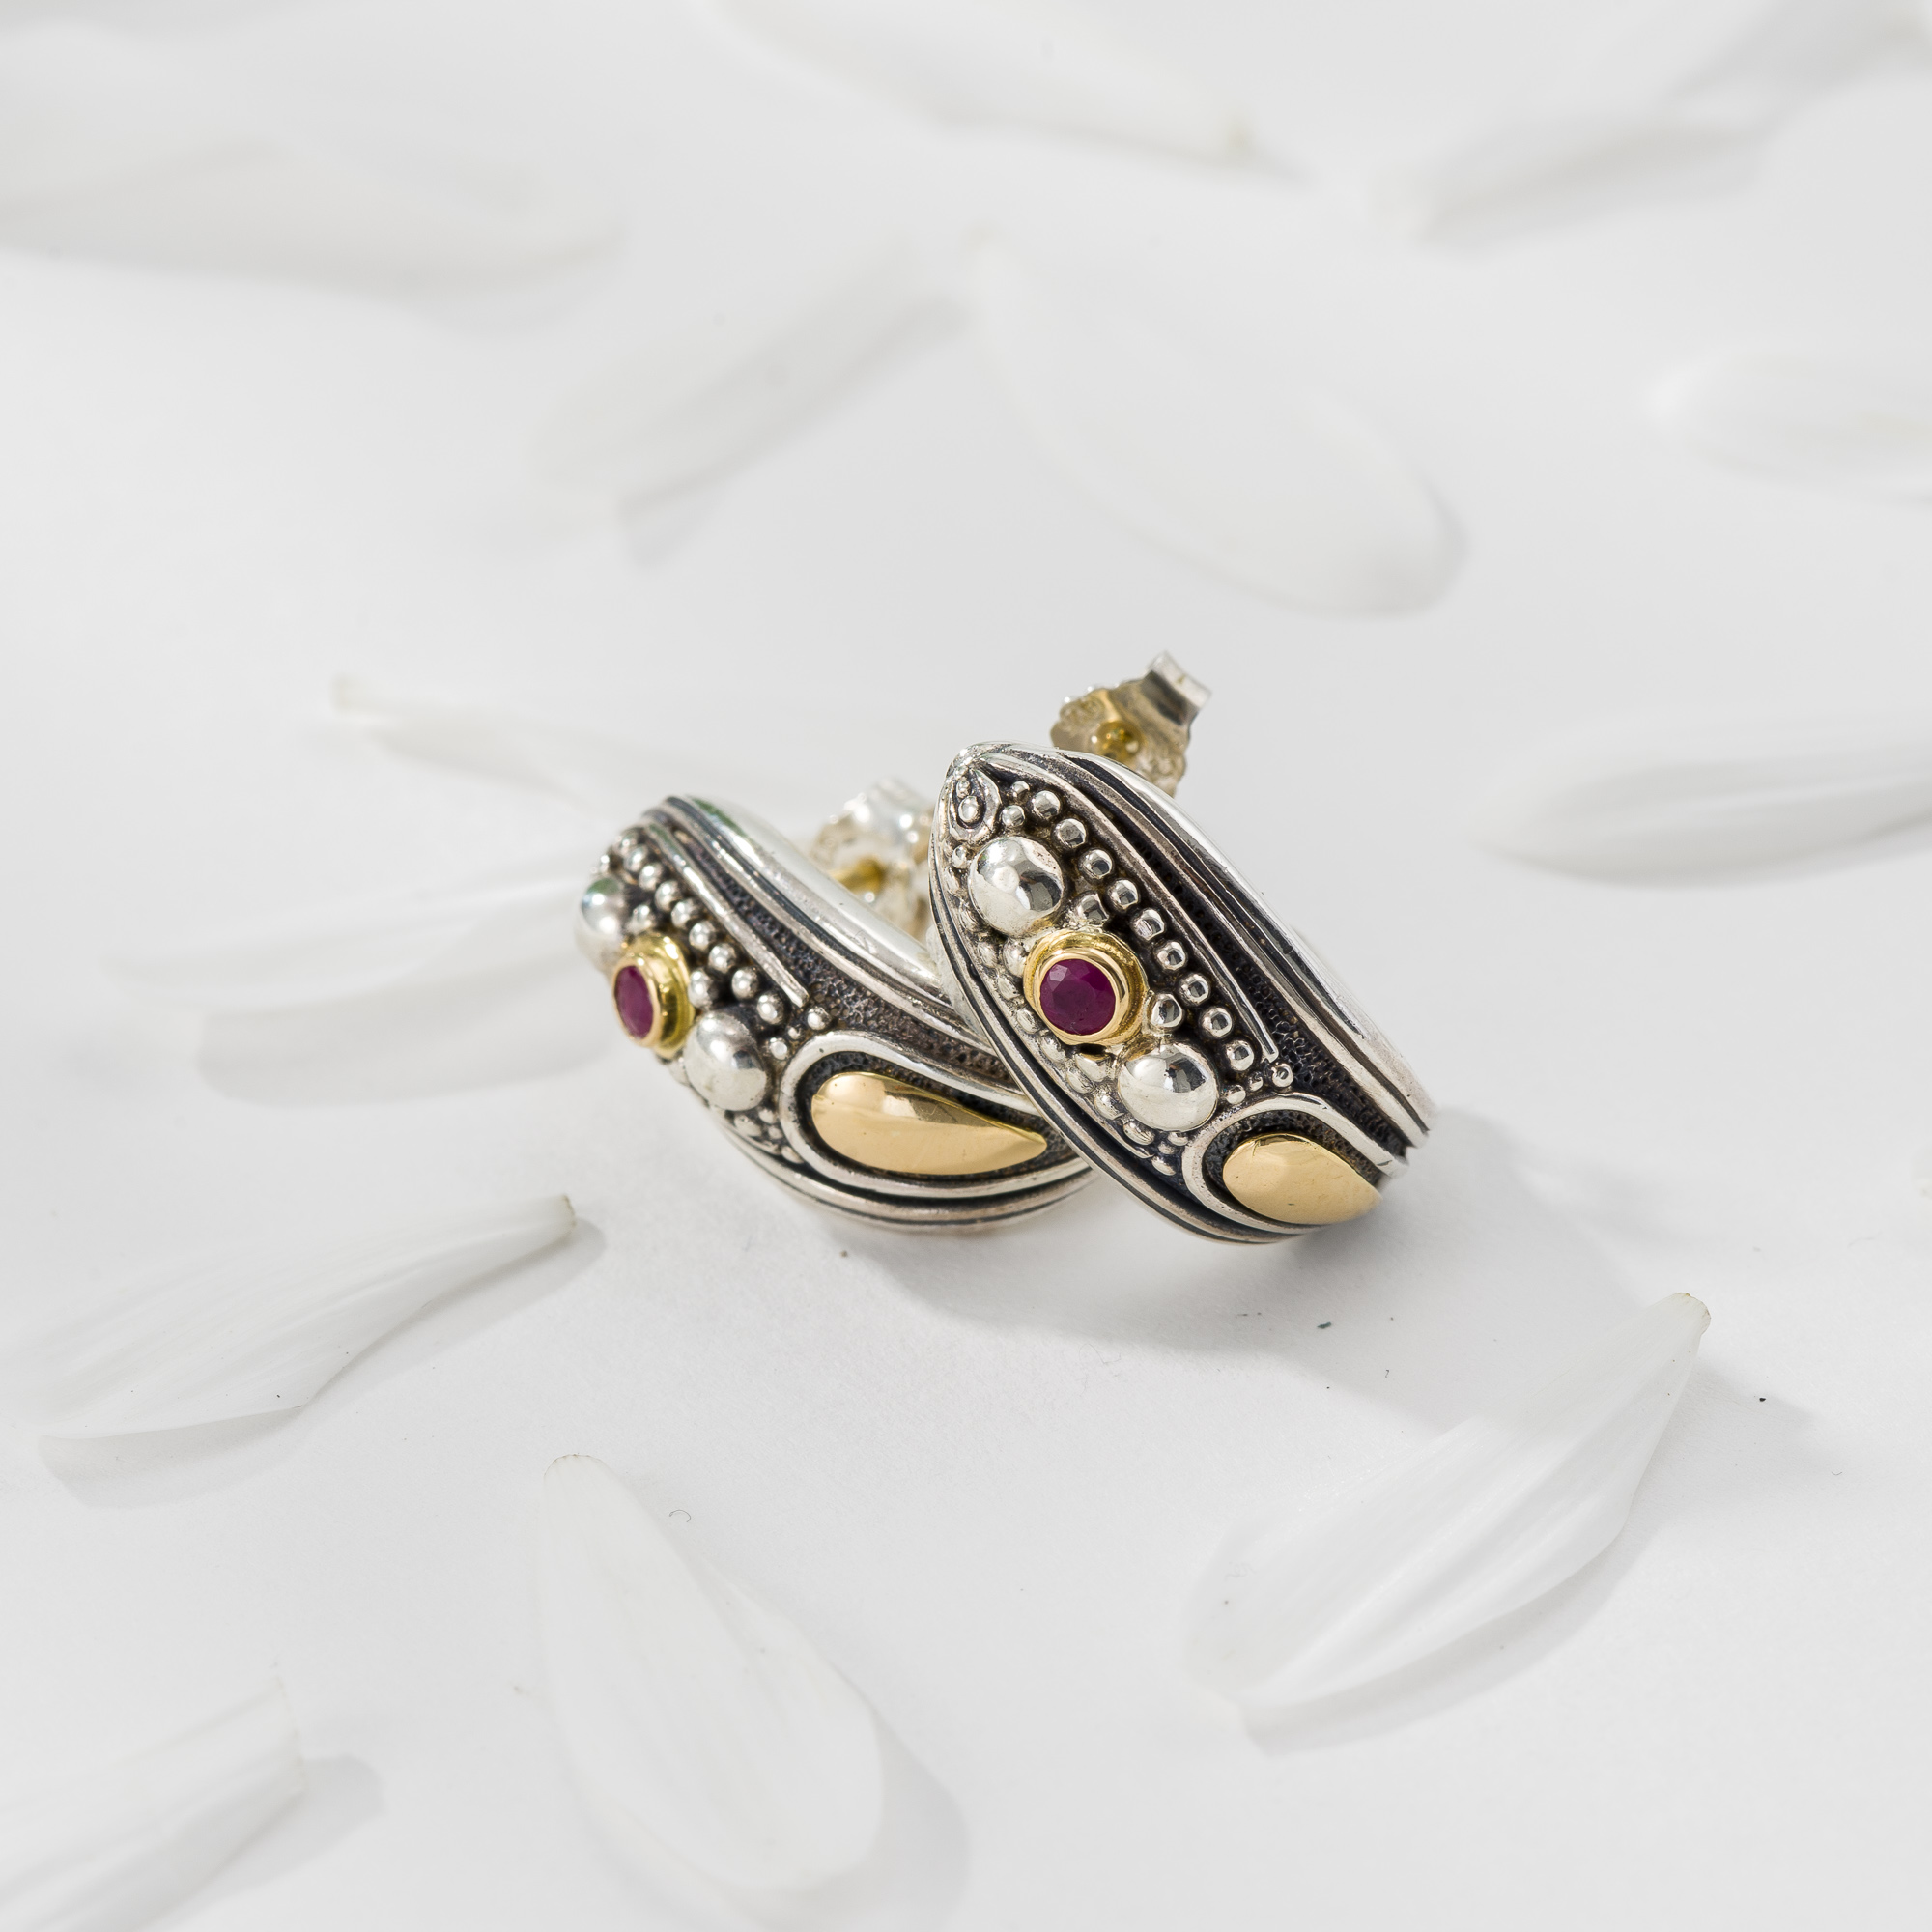 Byzantine Hoops Earrings in 18K Gold and Sterling Silver with Ruby